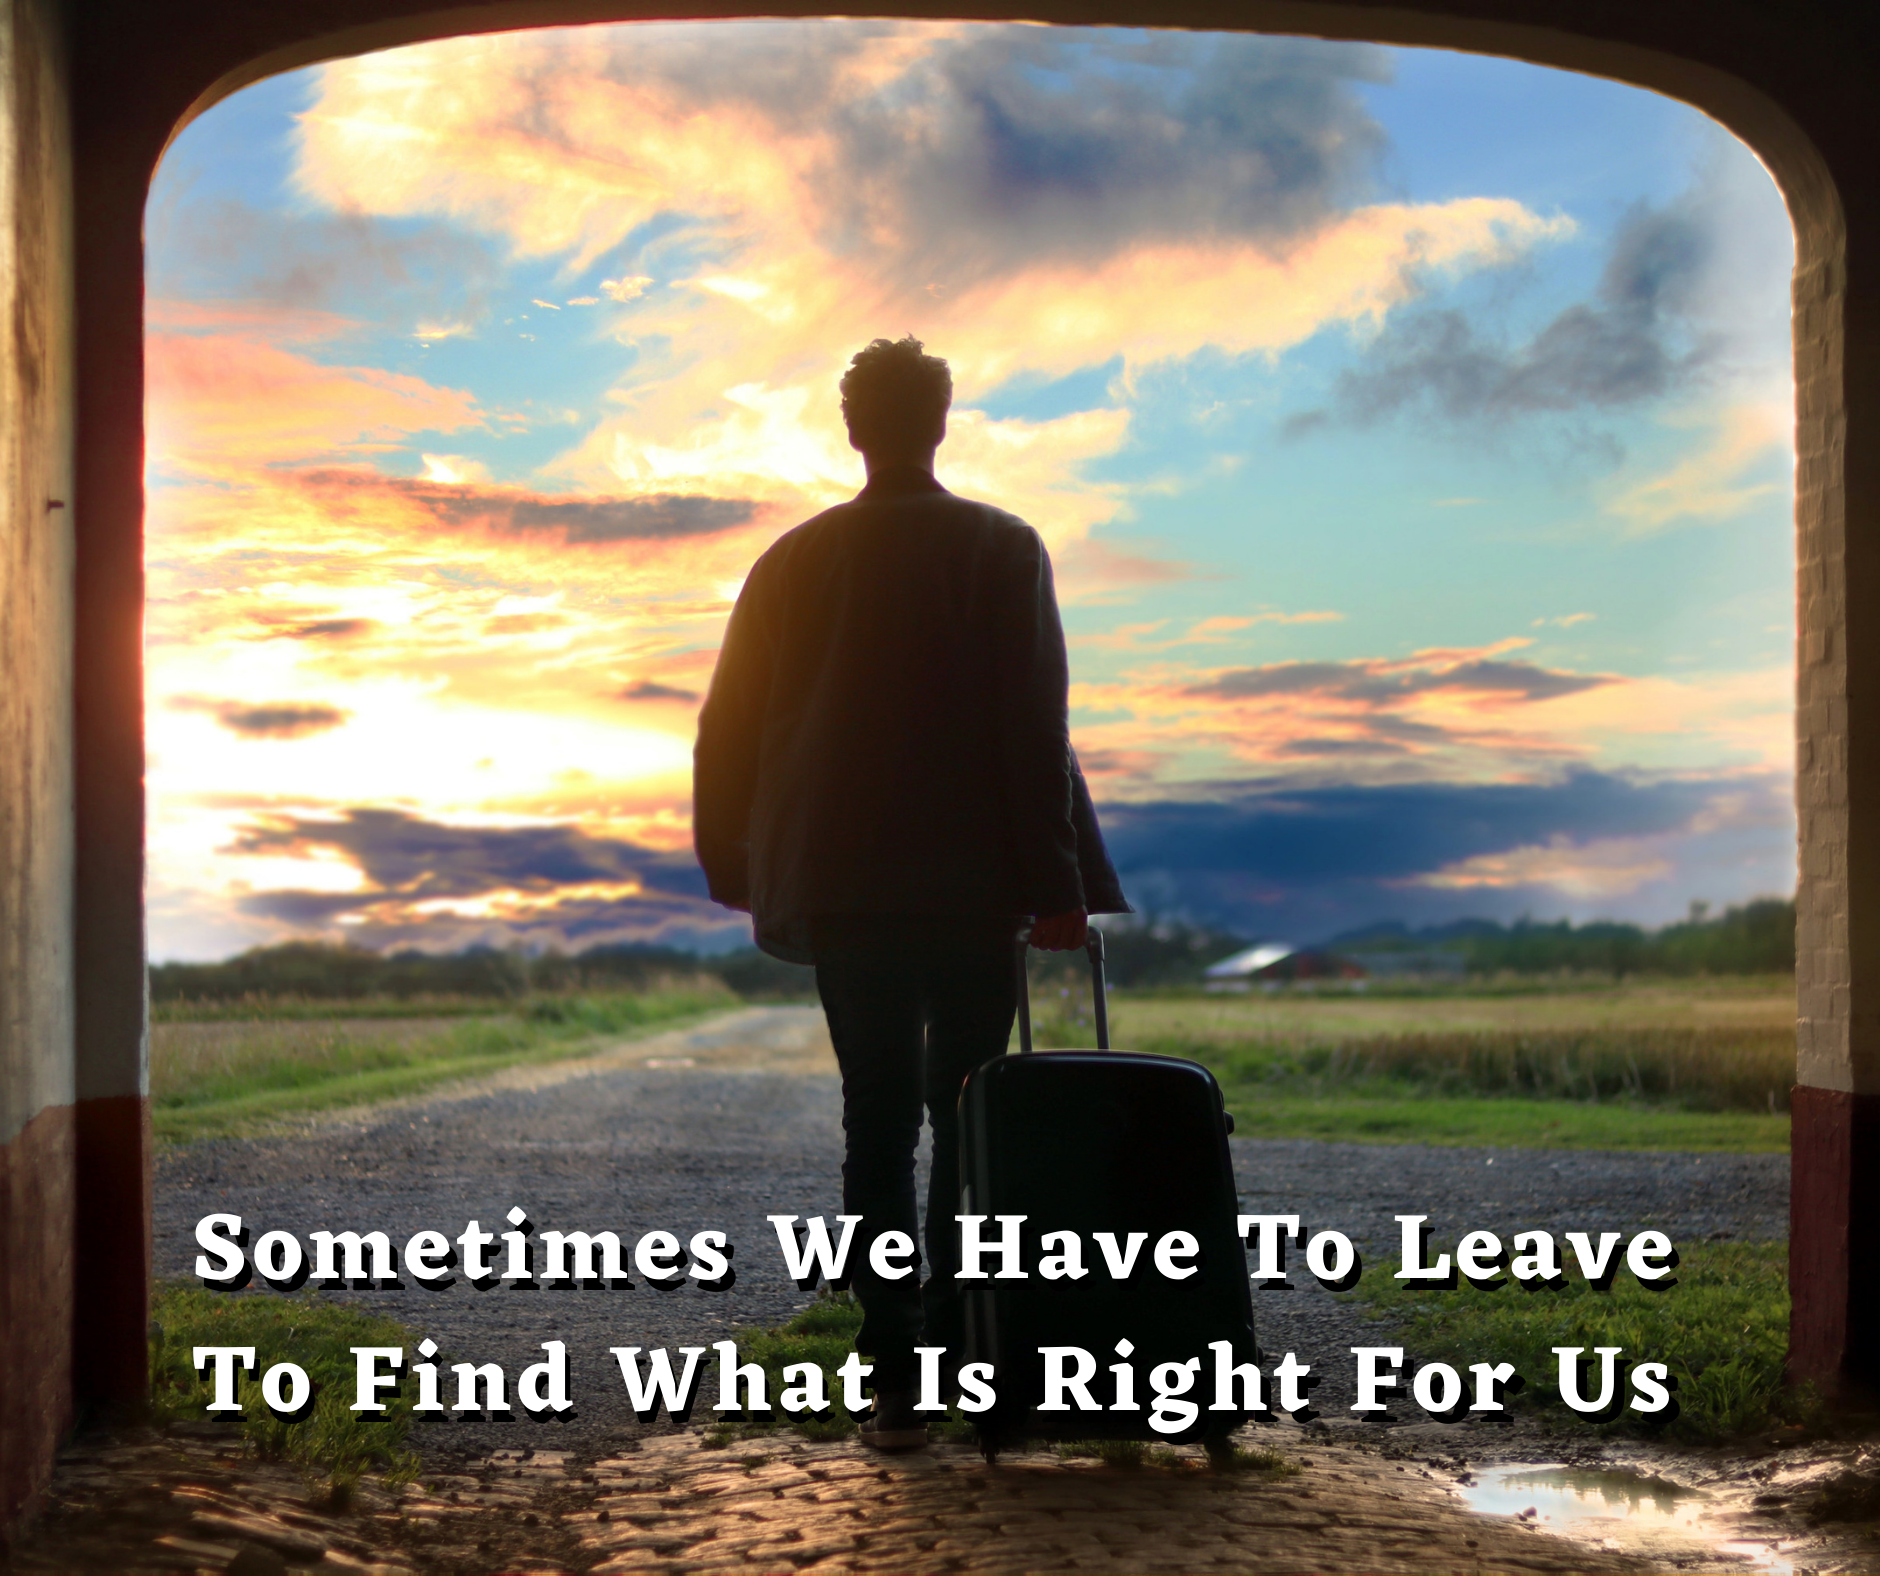 Sometime We Have To Leave To Find What Is Right For Us